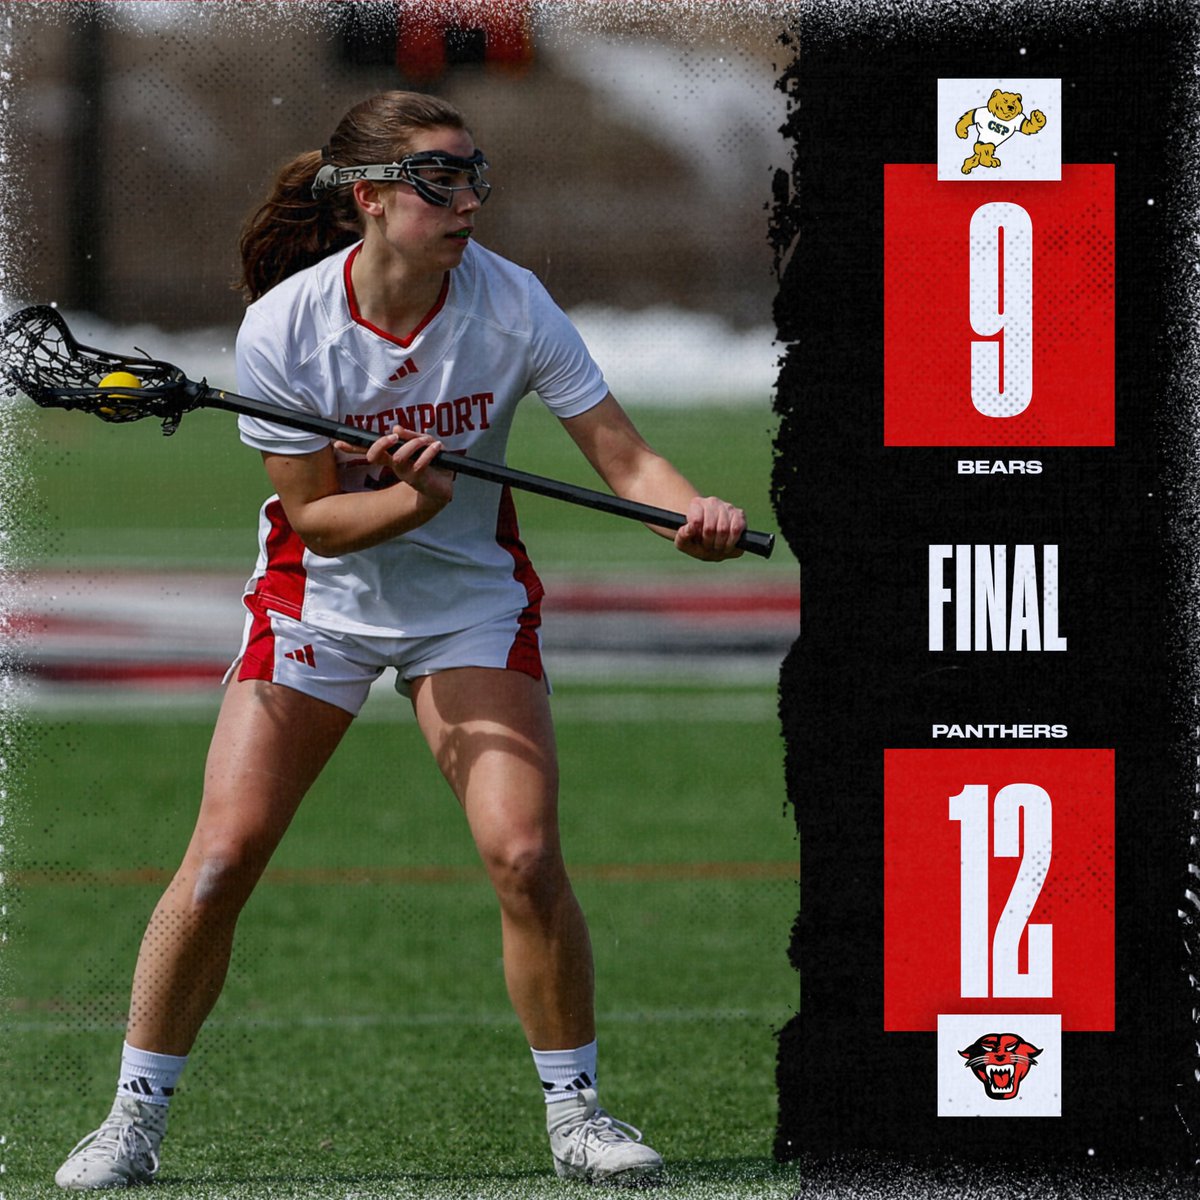 Panthers win!! DU takes a home victory over CSP. Krueger led the way with four goals. Malpass (three) and Haynes (two) were the next leading scorers, followed by one goal from Rodriguez, Basha, and Bird. The Panthers improve to 6-6 with their first GLIAC win. #DUingWork